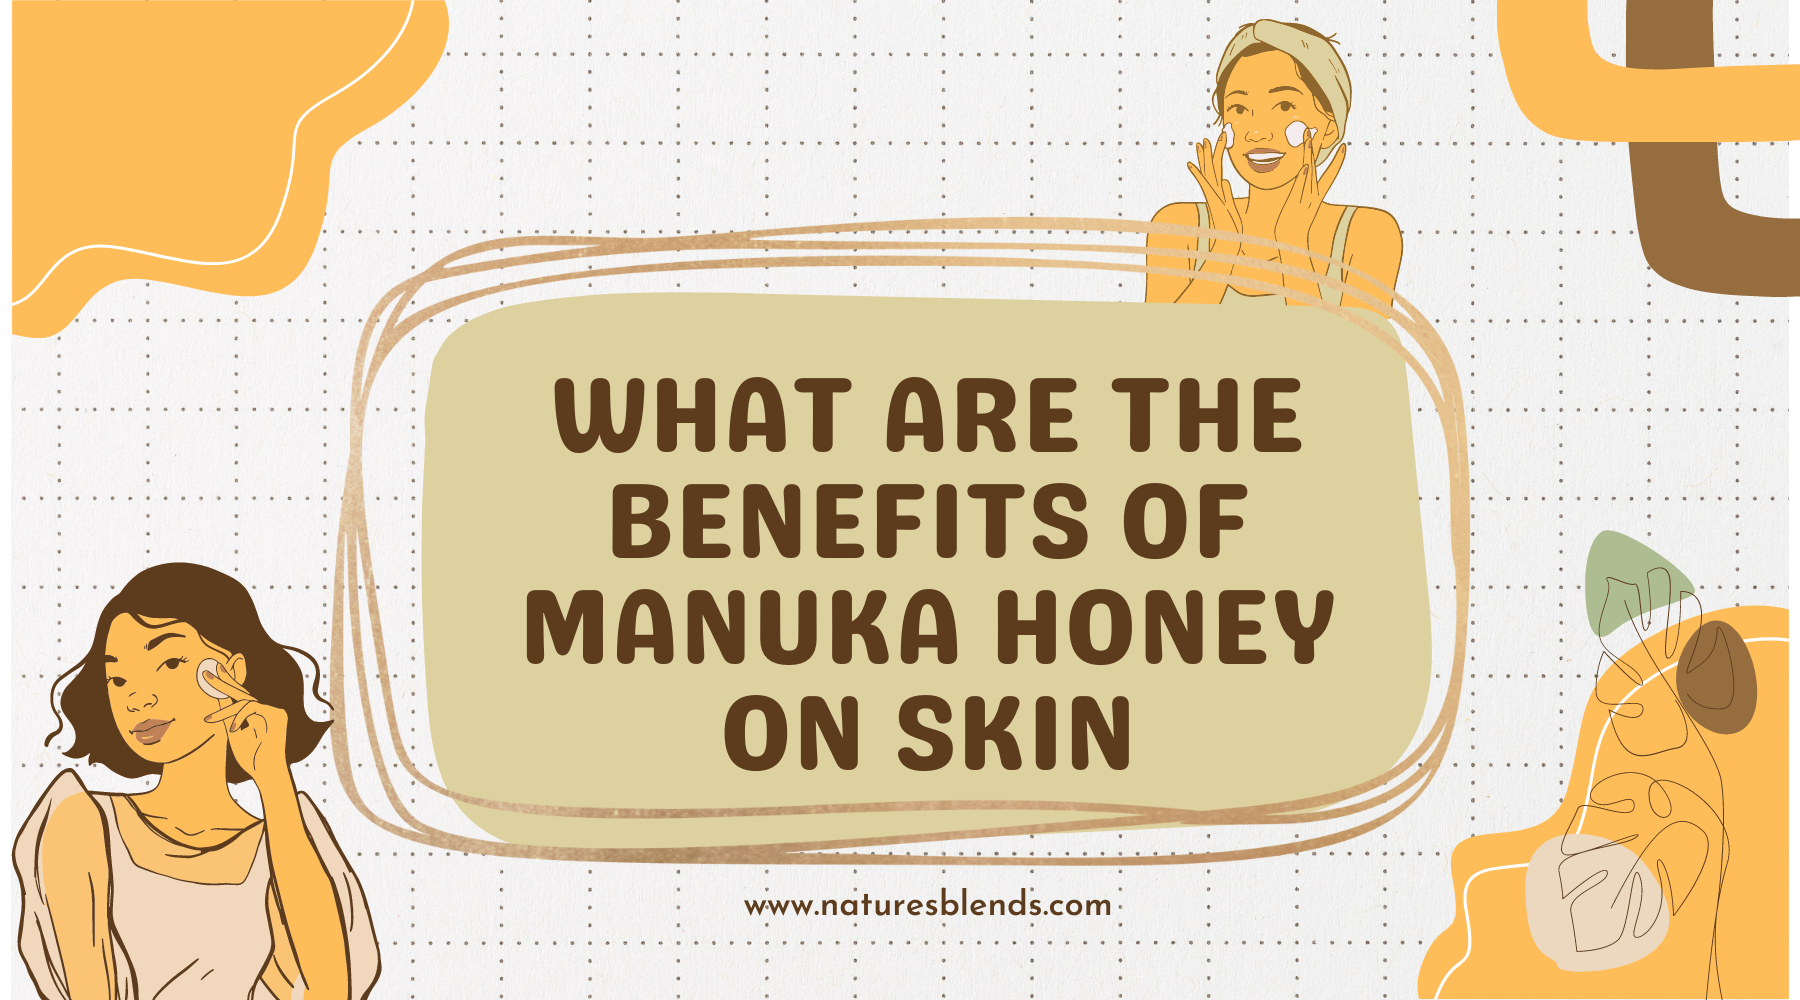 What Are The Benefits Of Manuka Honey On Skin